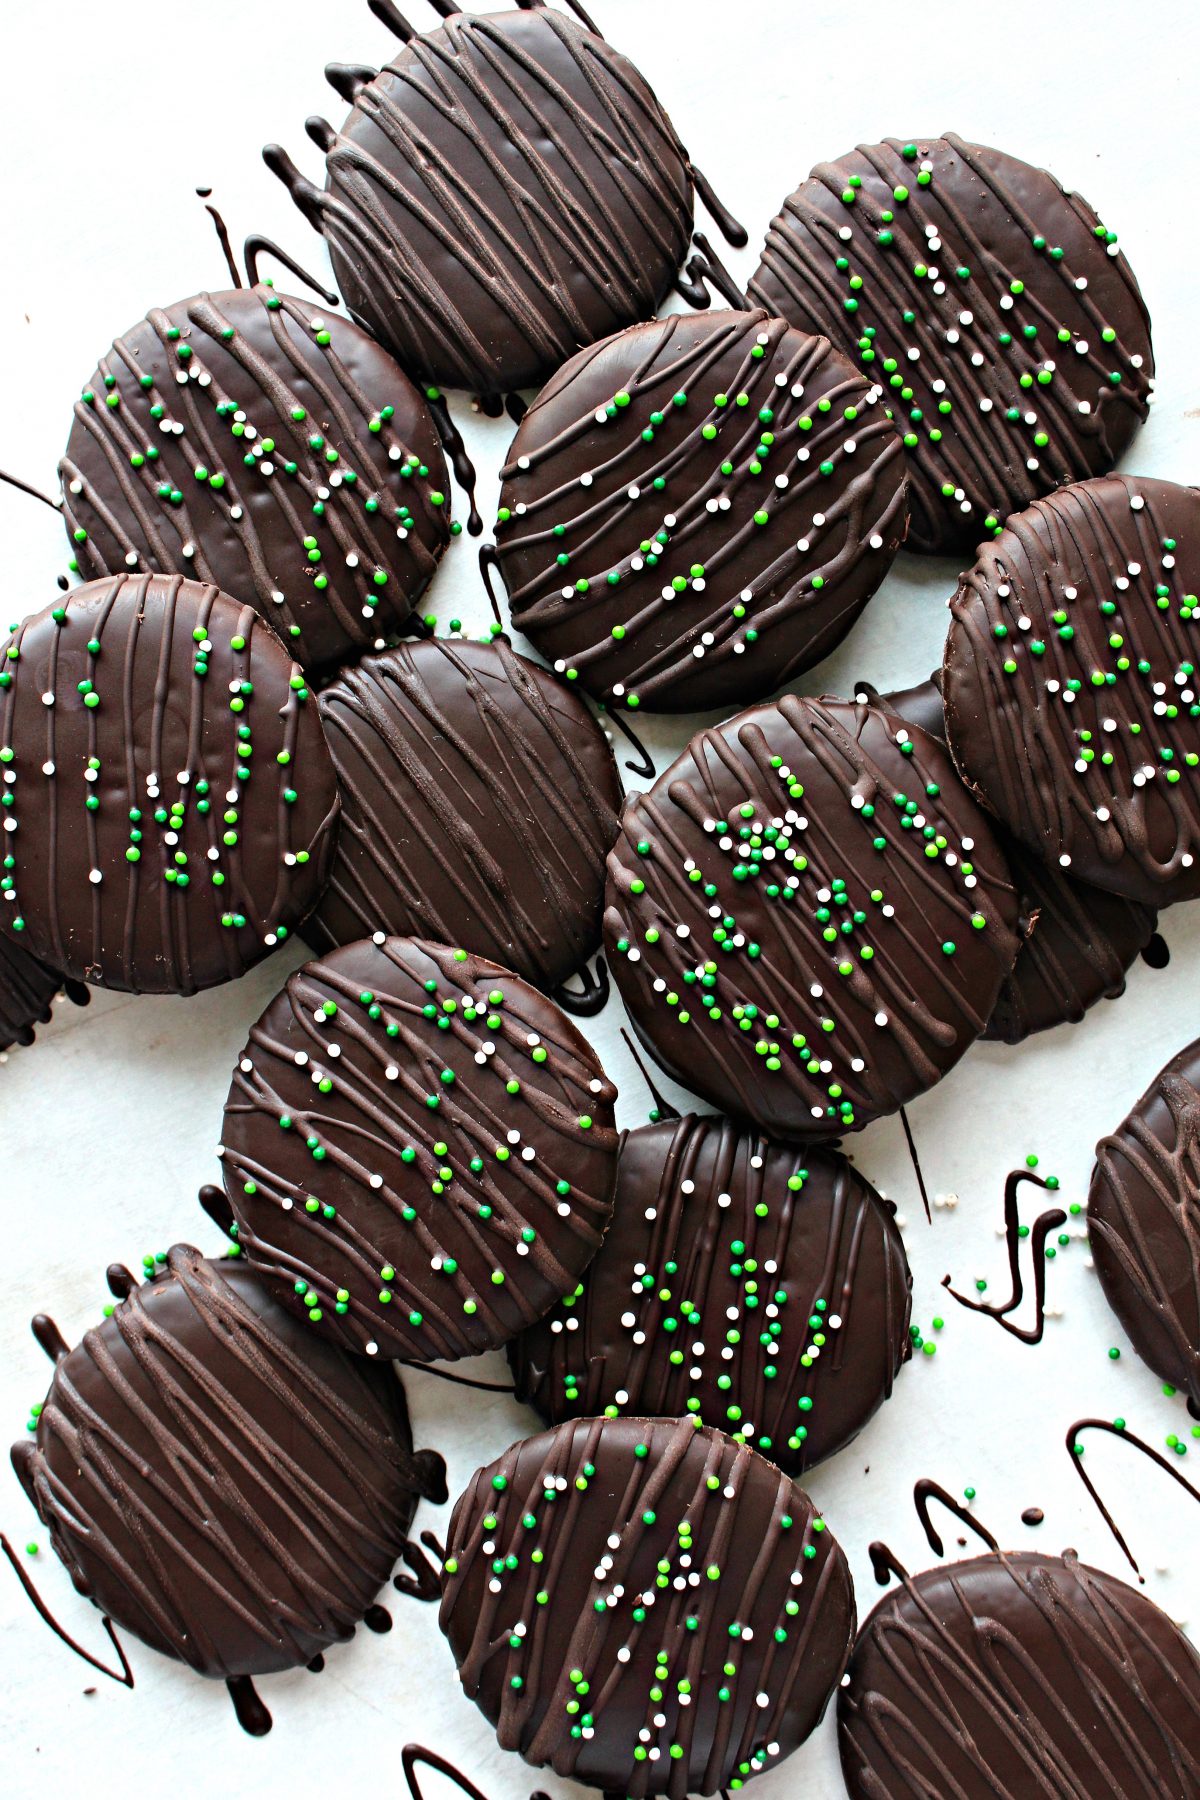 Chocolate Covered Chocolate Mint Cookies are decorated with chocolate zigzags and green and with nonpareil sprinkles.